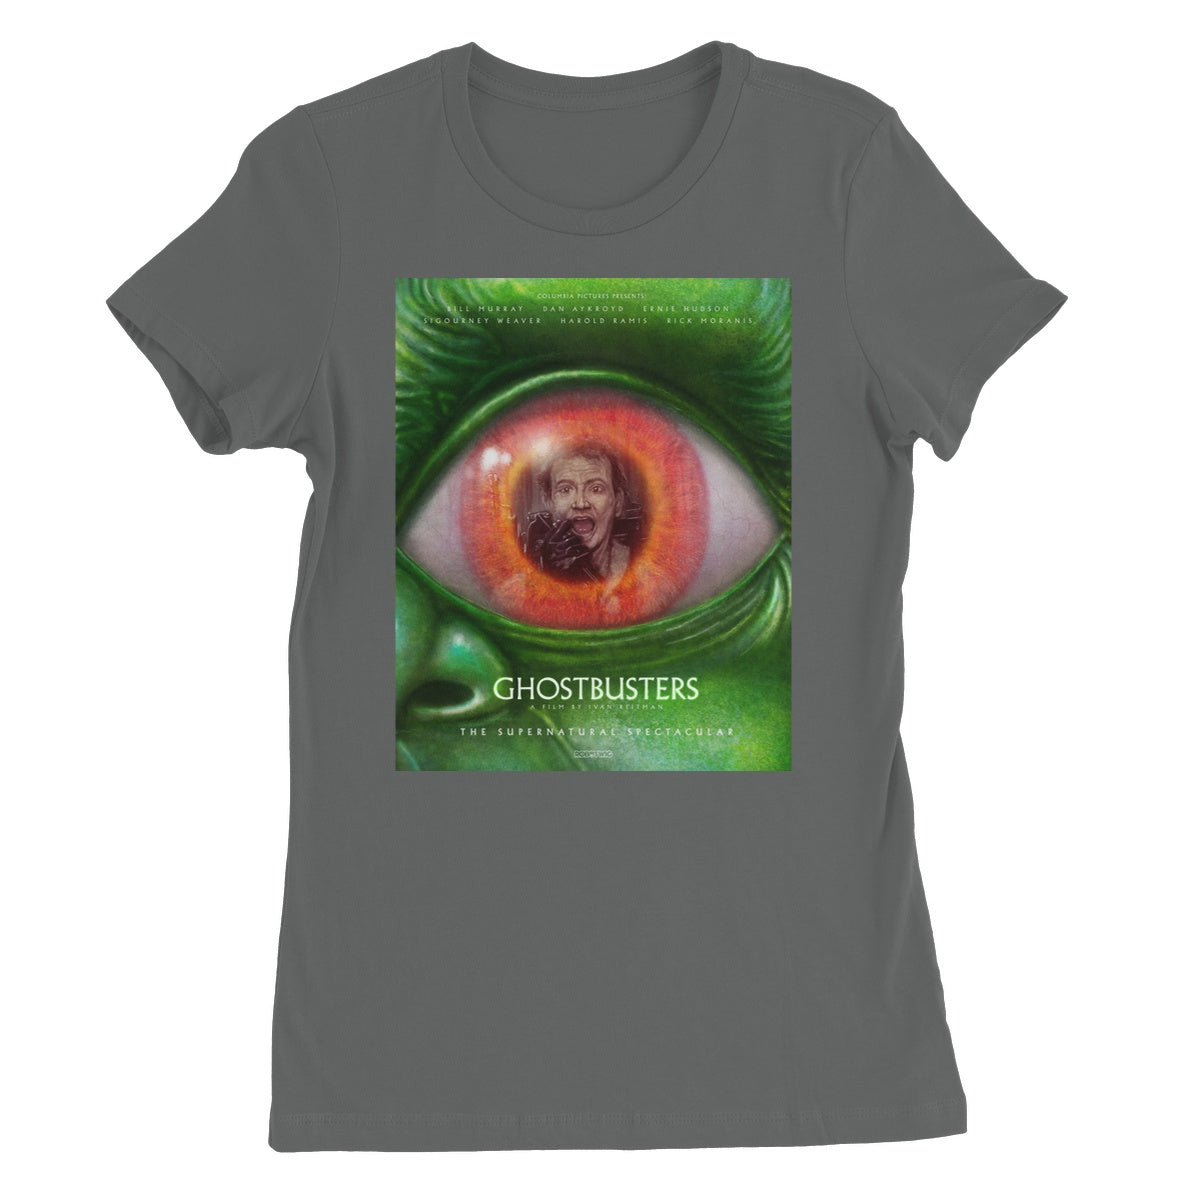 Slimed Illustrated Tee Women's Favourite T-Shirt